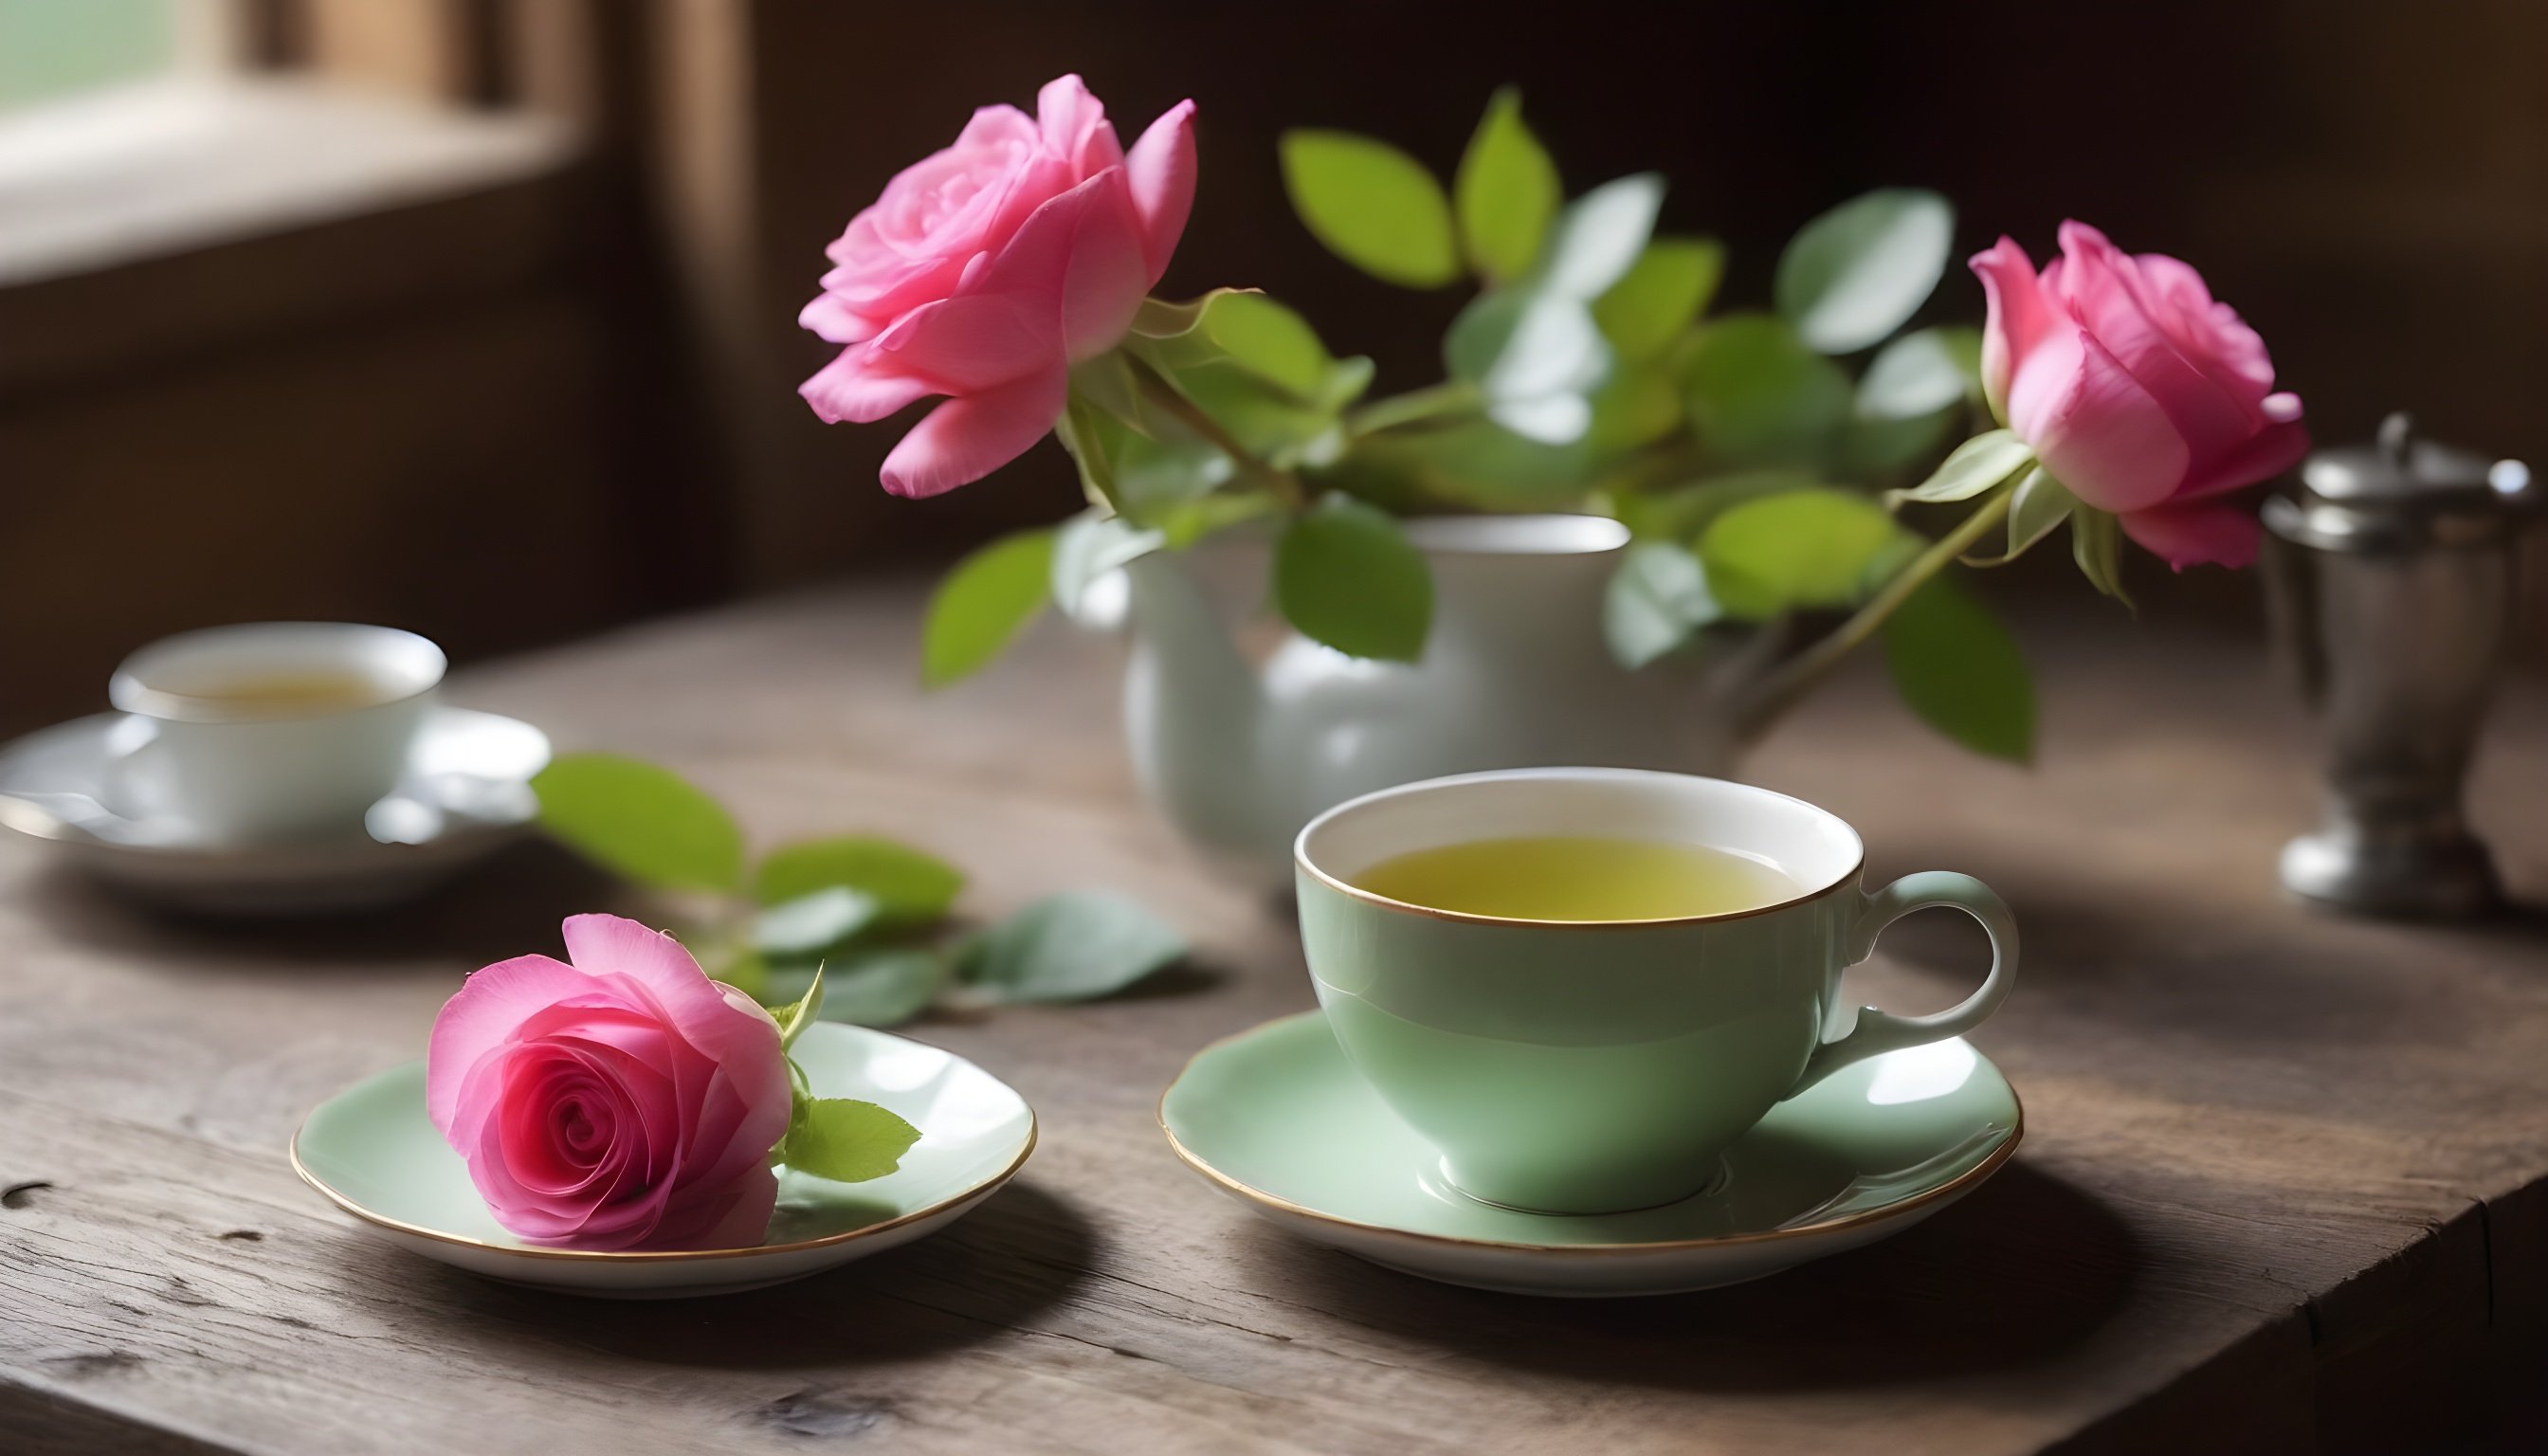 A-steaming-cup-of-green-tea--adorned-with-a-vibrant-pink-rose--sitting-on-a-rustic-wooden-tabl...jpg